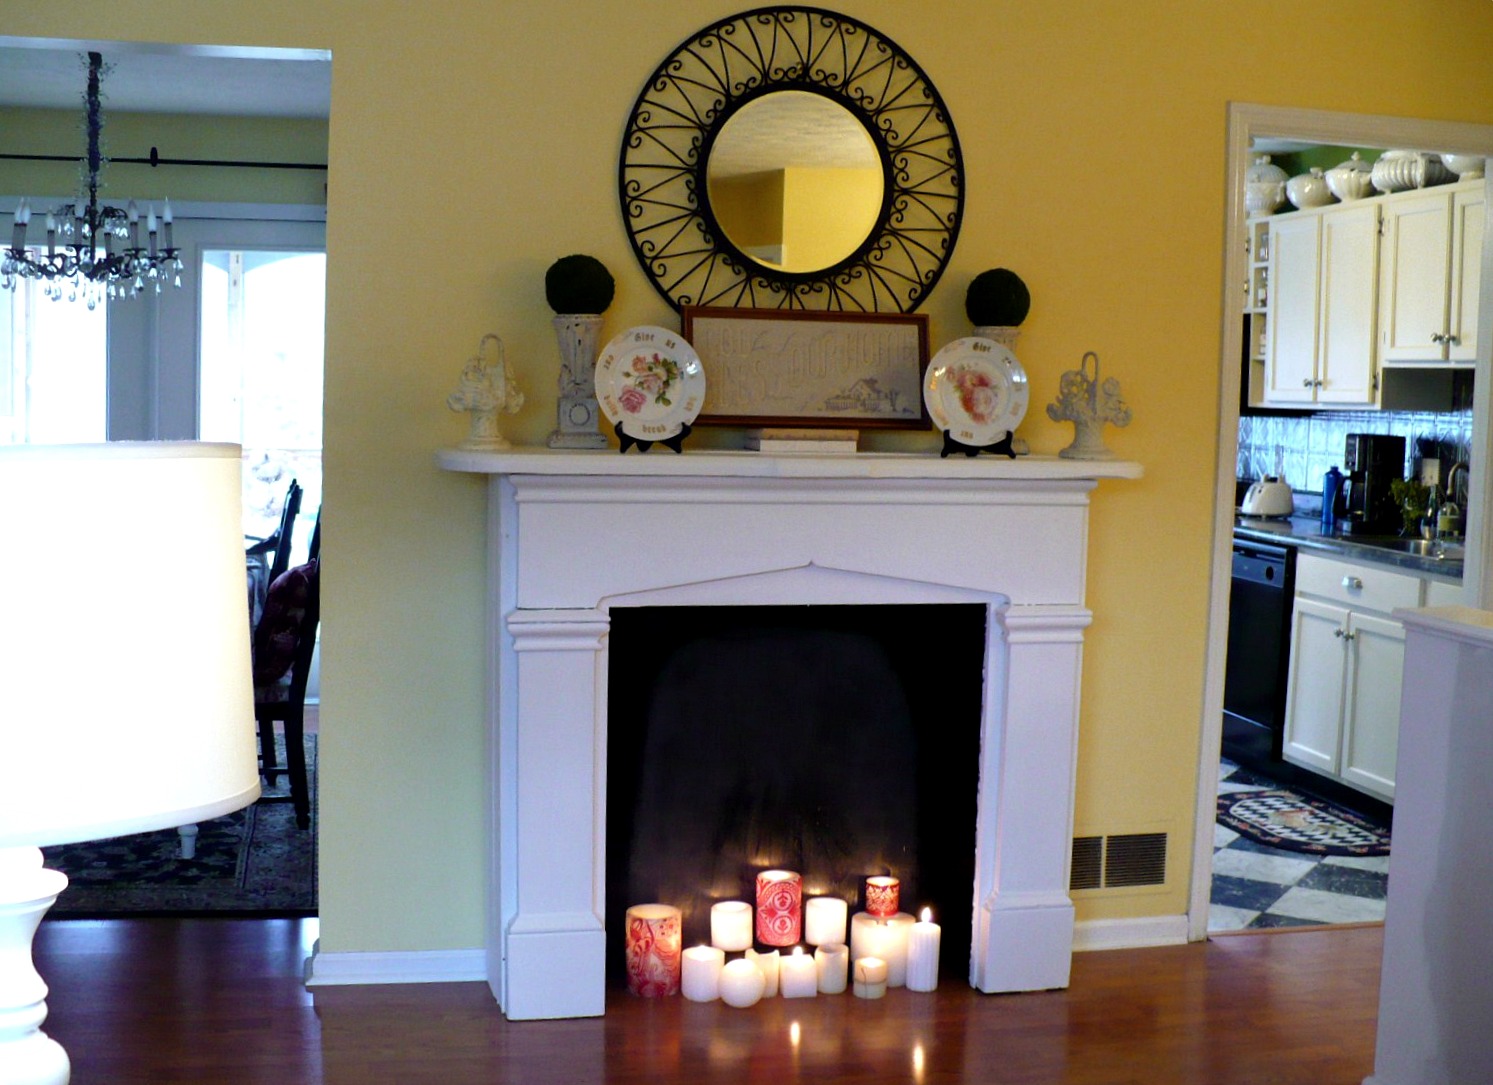 Fireplace Mantels for Sale Craigslist Unique How to Make A Fake Fireplace Charming Fireplace